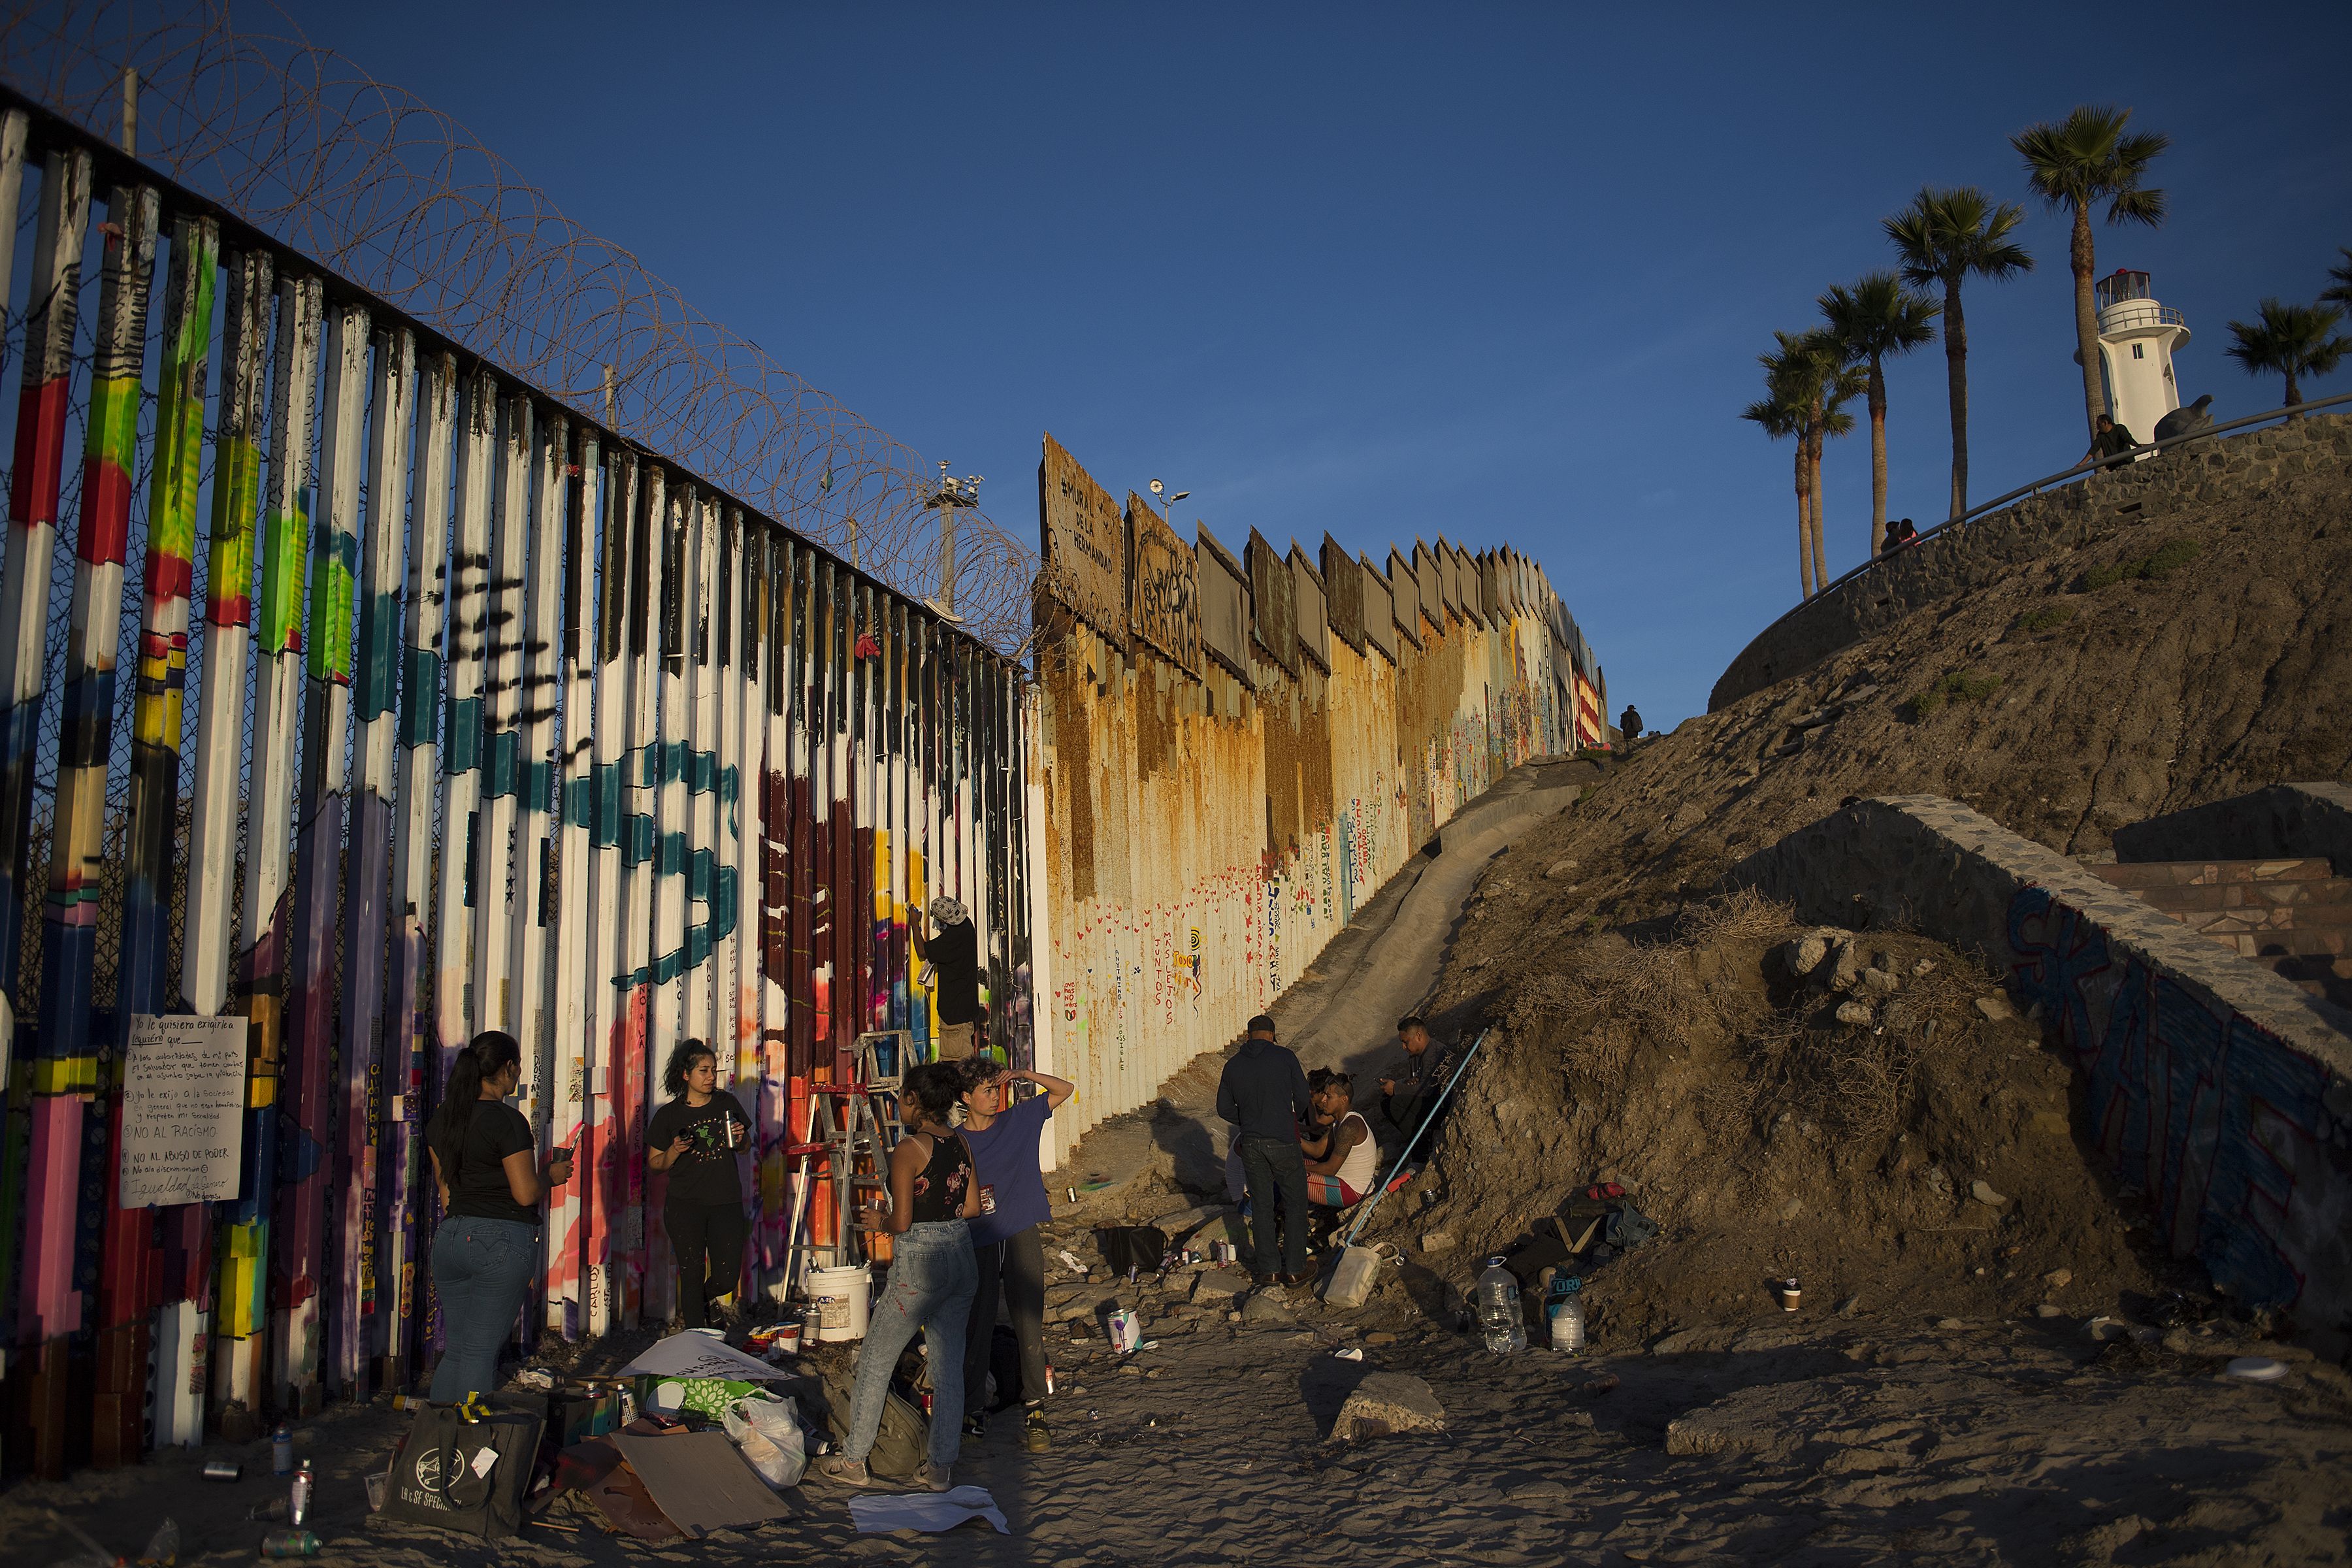 Artists add a personal touch to the border wall at Playas de Tijuana at sunset Dec. 1. Image by Amanda Cowan. Mexico, 2019.